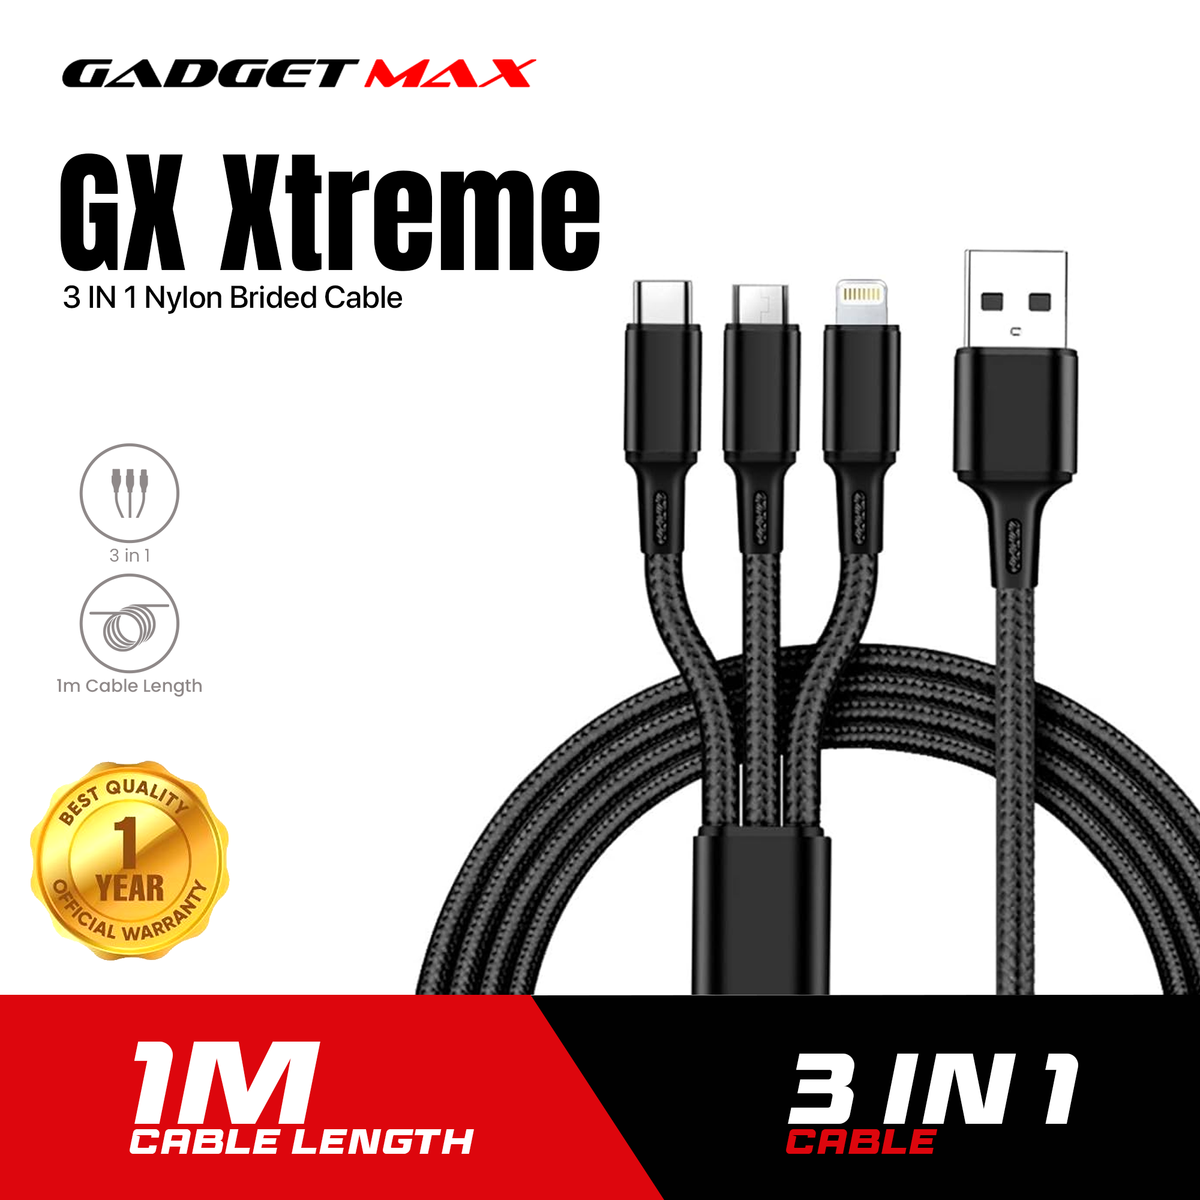 GADGET MAX GX 3IN1 XTREME 3 IN 1 NYLON BRAIDED CABLE (1.5M)(5V)(3.5A)